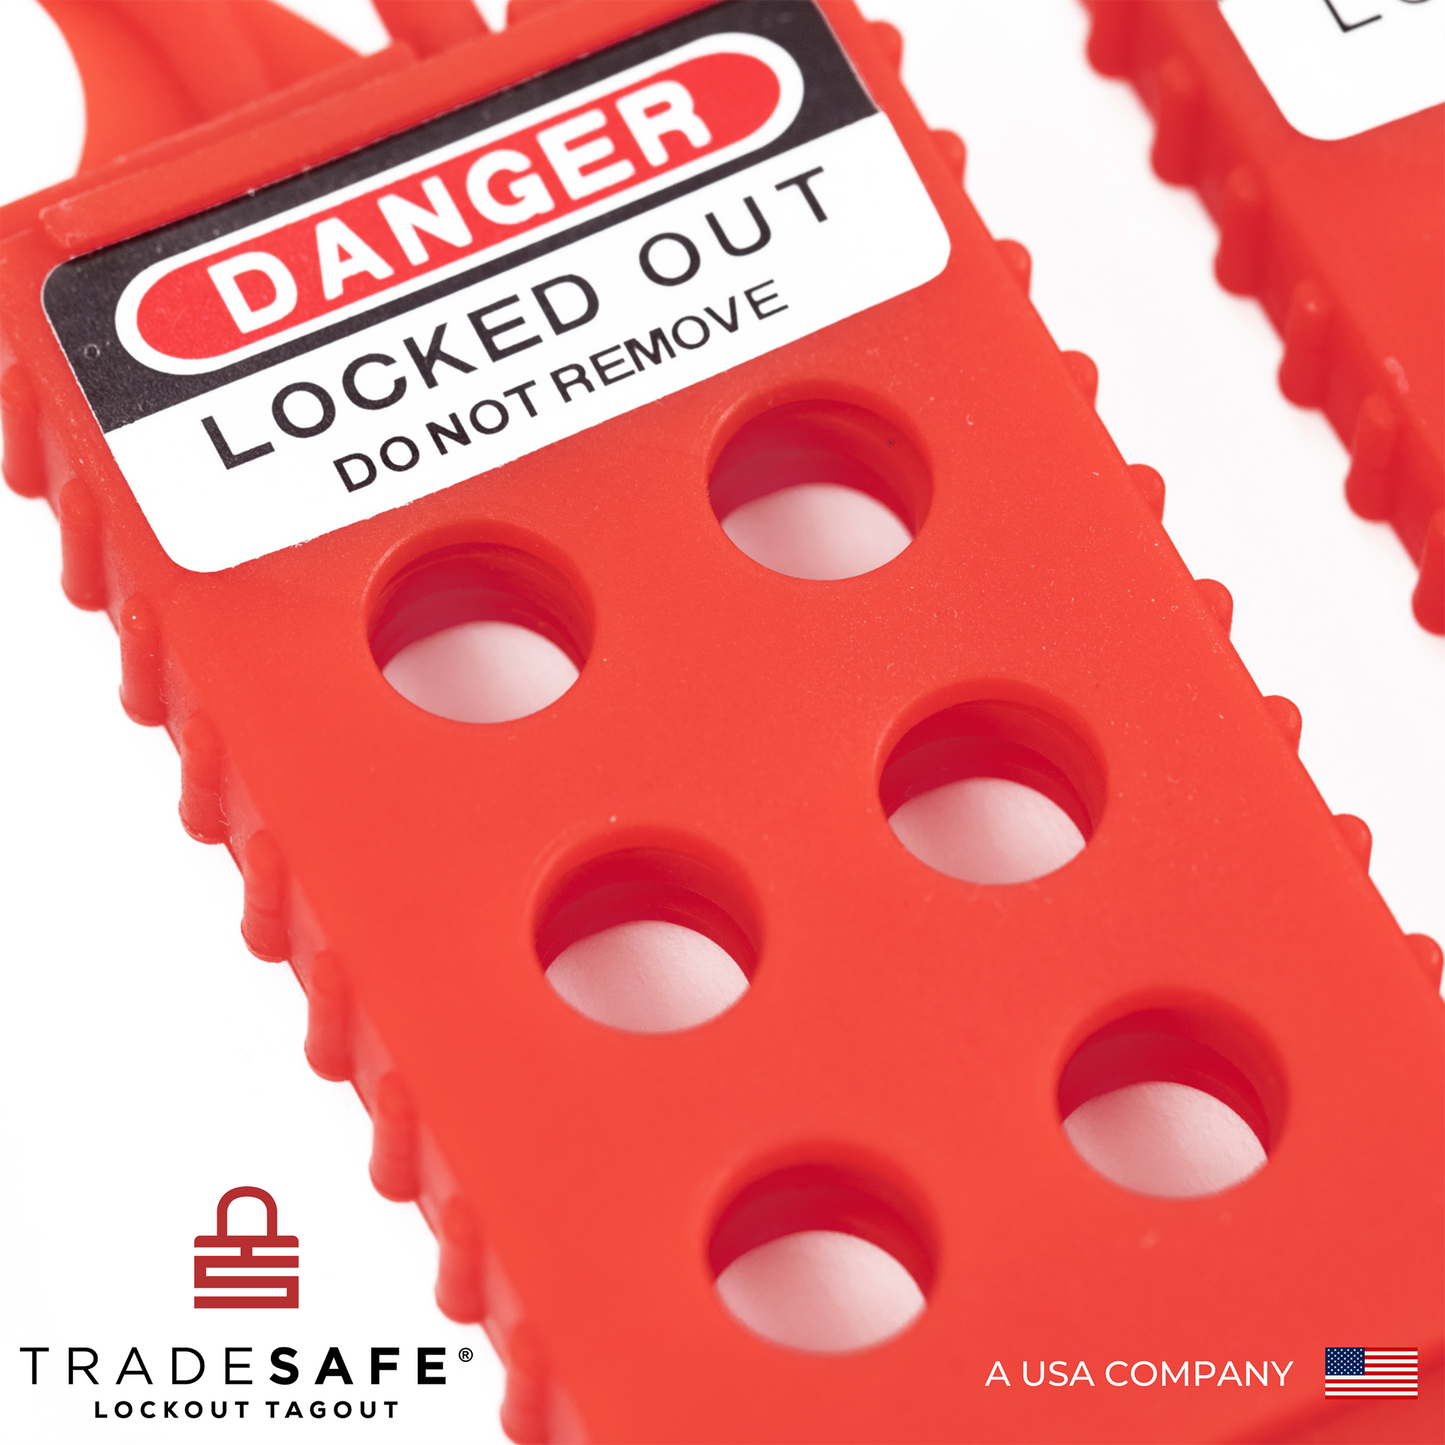 extreme close up view of the body of the plastic red lockout tagout hasp featuring the 6 holes in its body